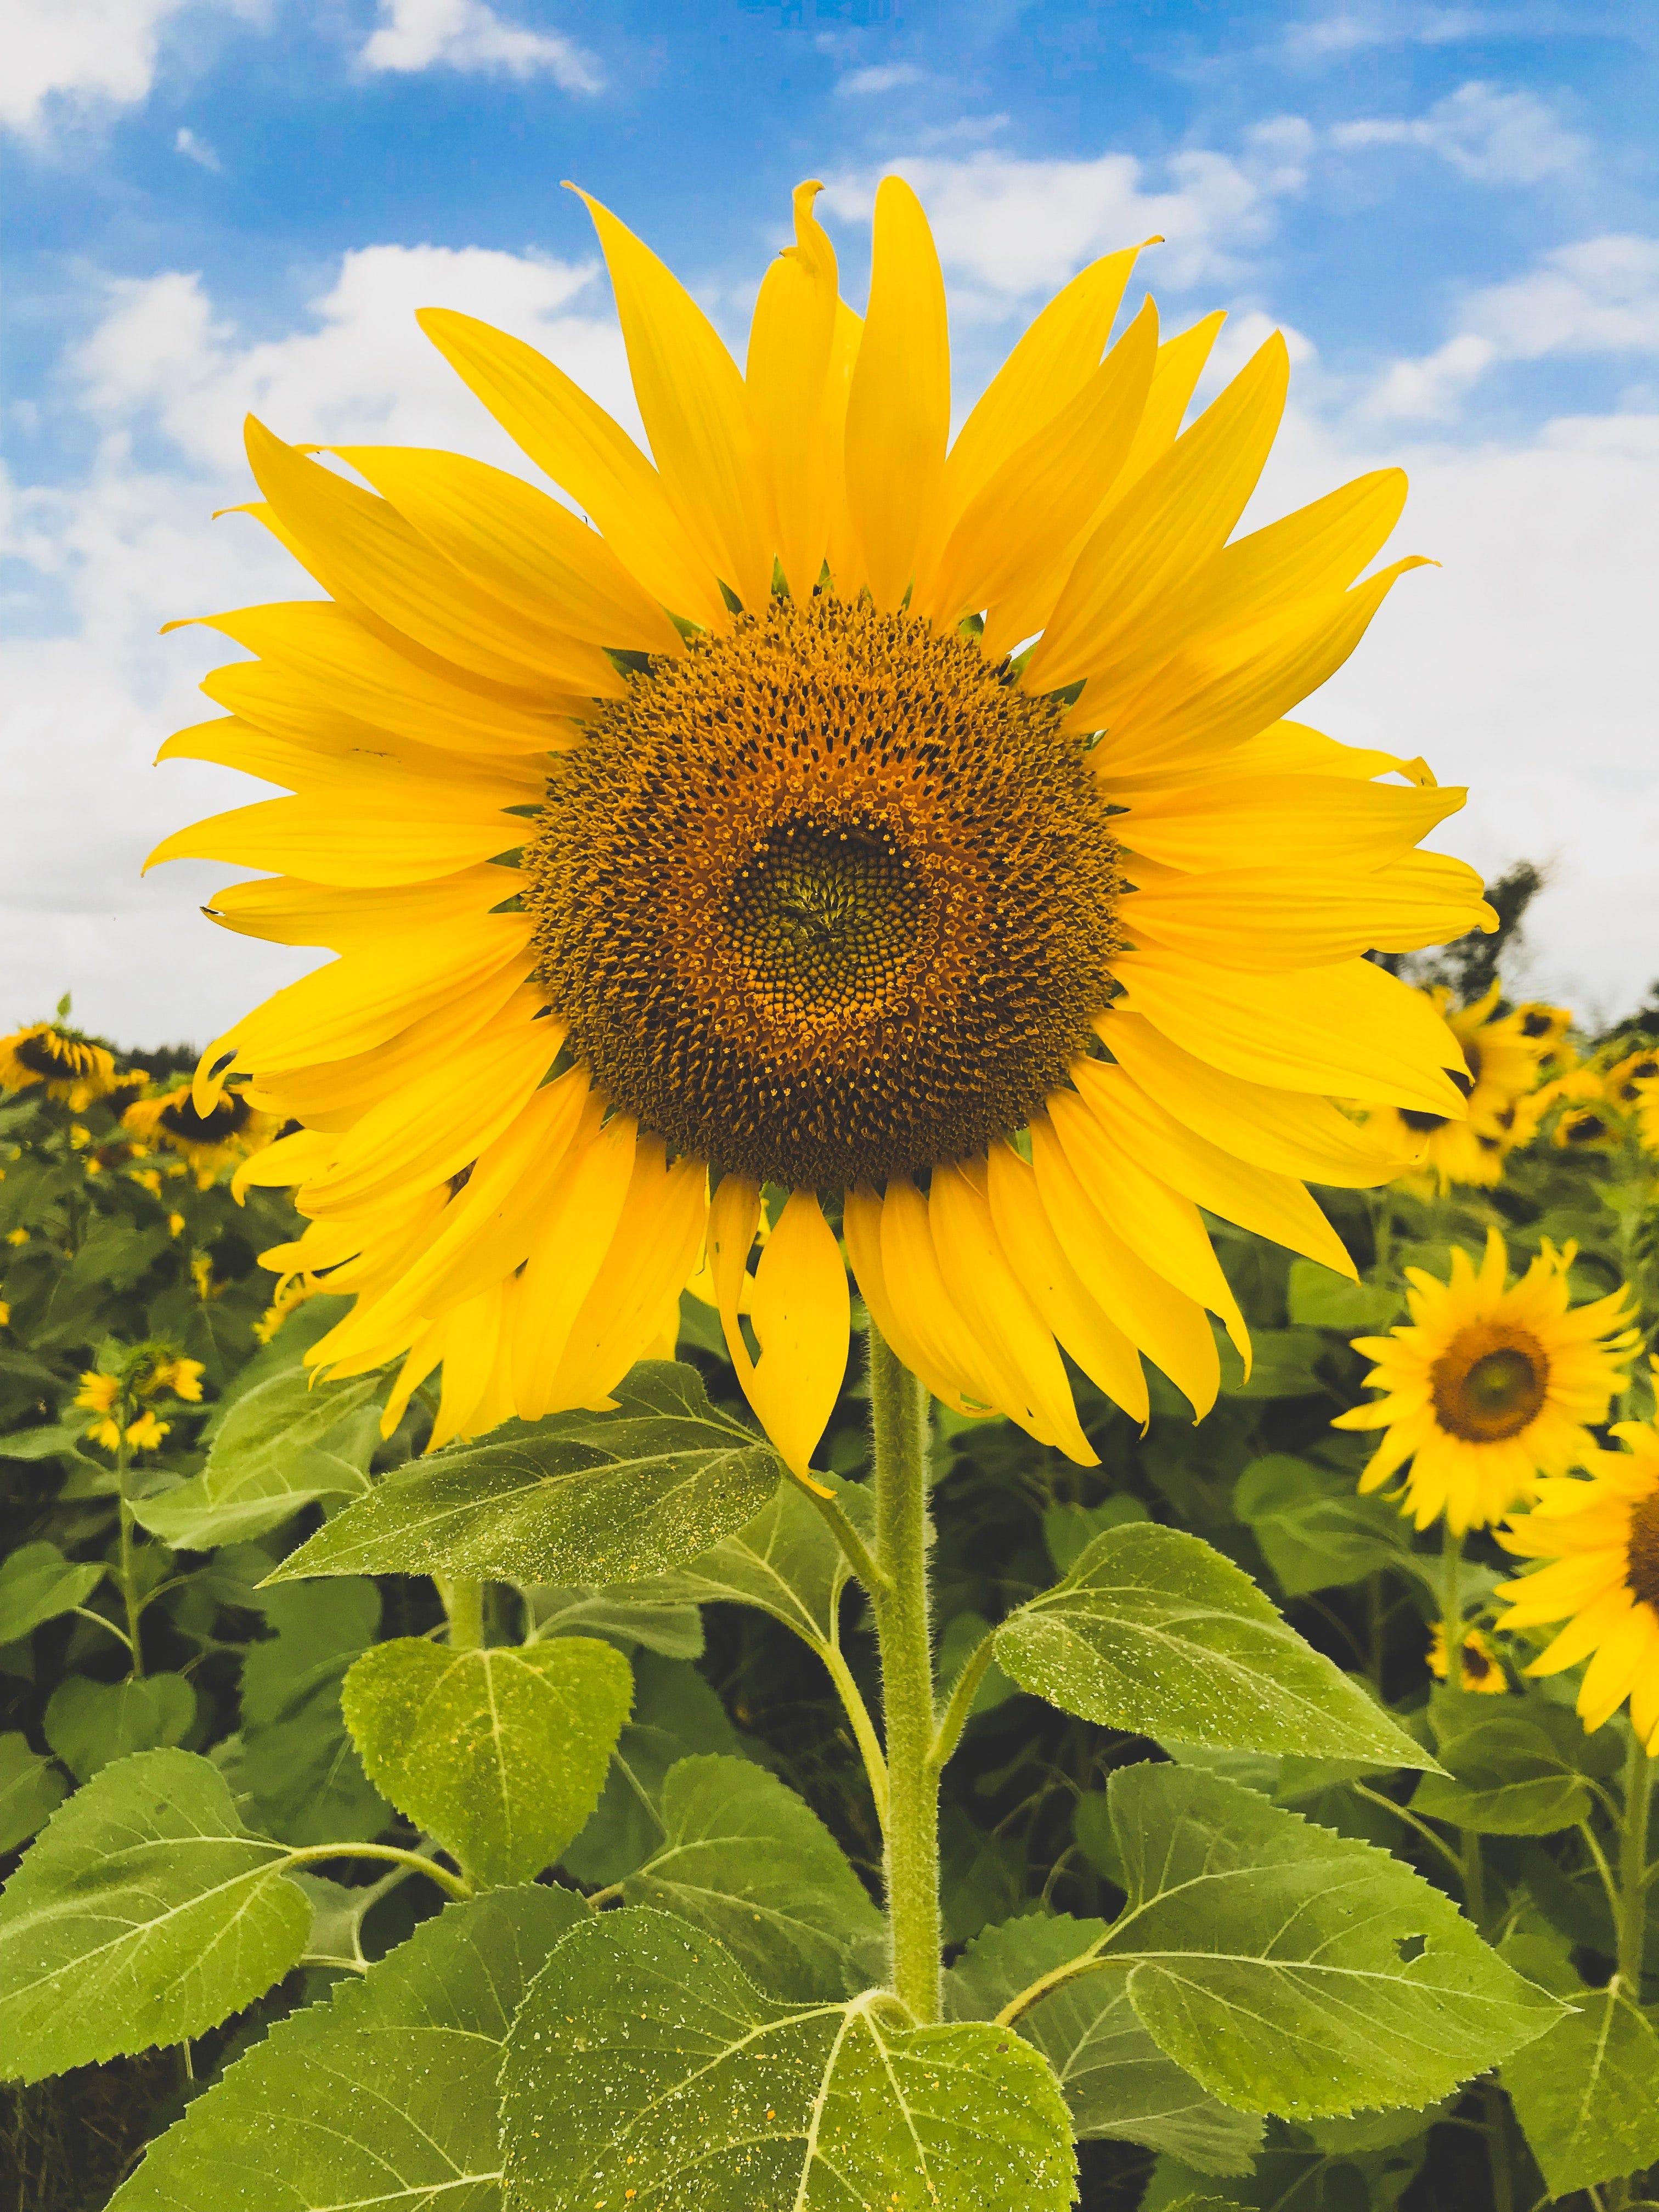 single sunflower with a lightly cloudy sky in background